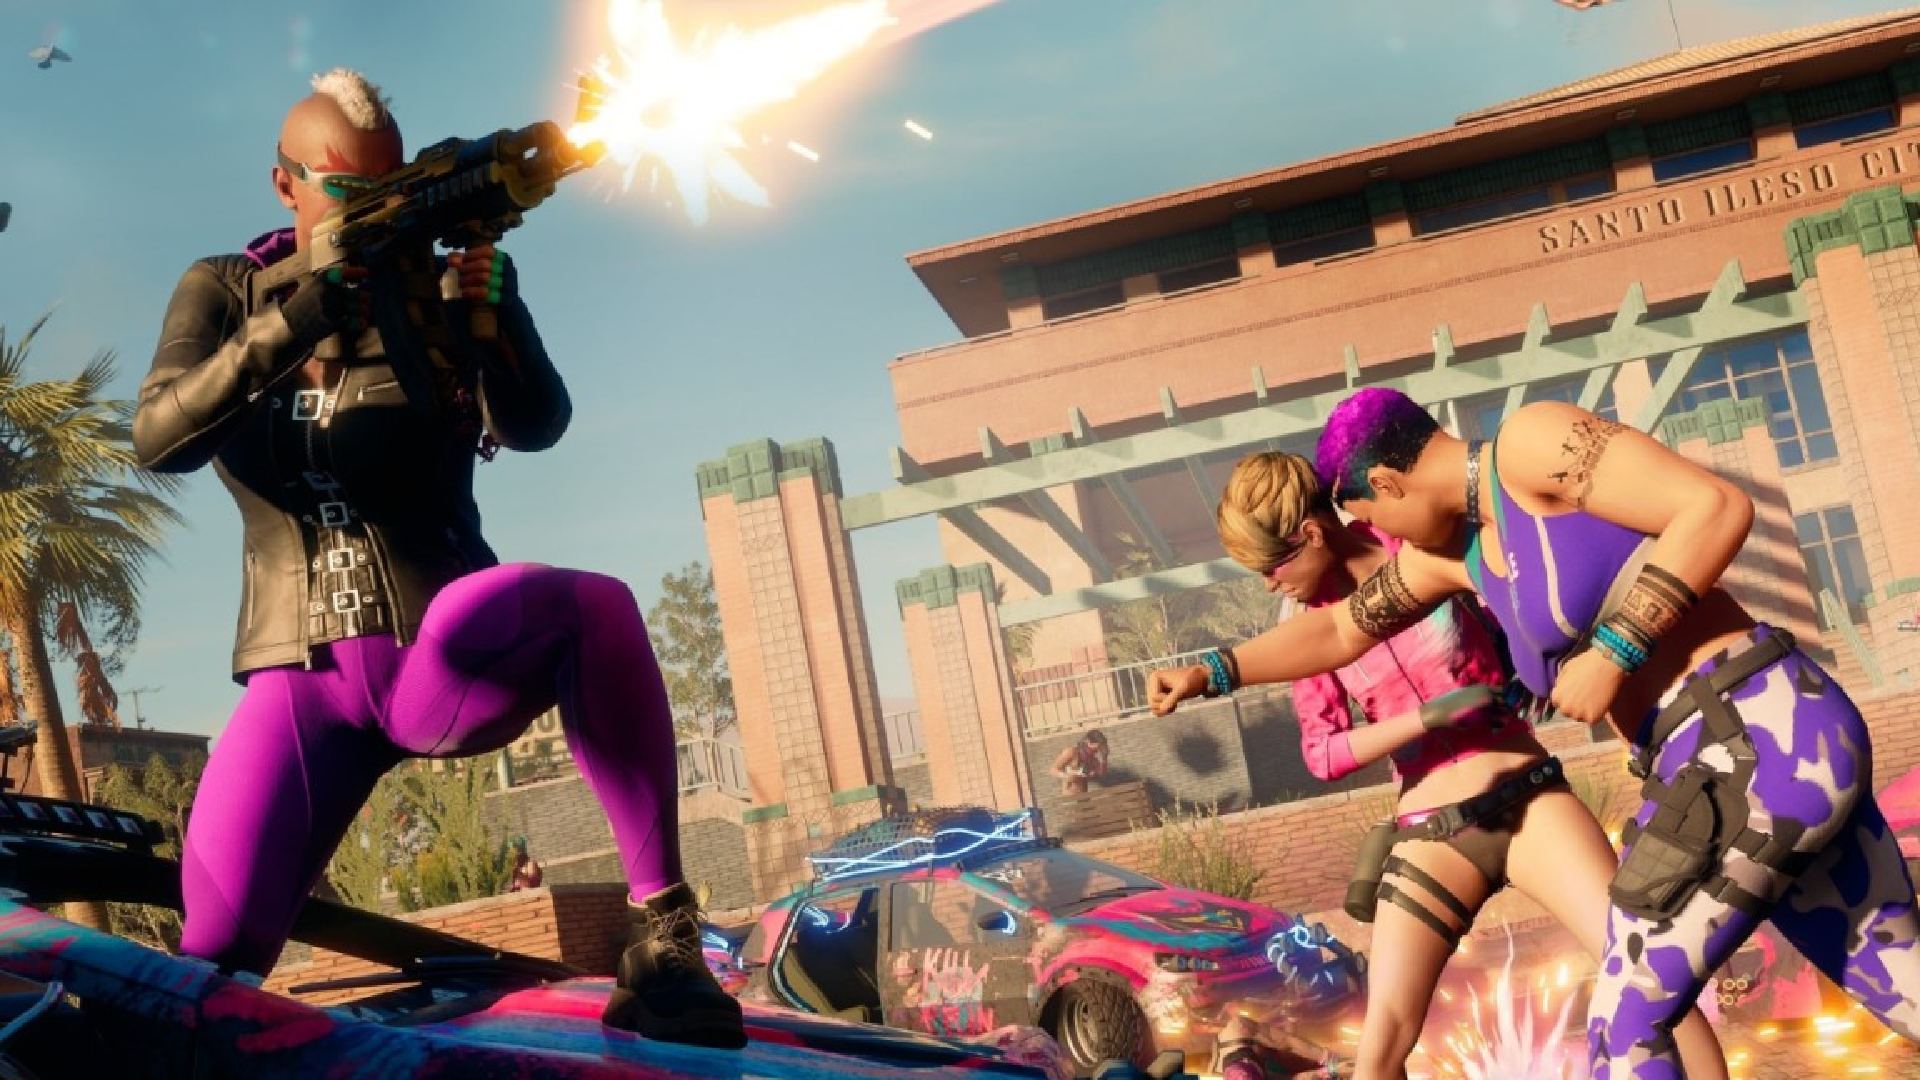 Saints Row Reboot: The Boss can be seen firing some weapons